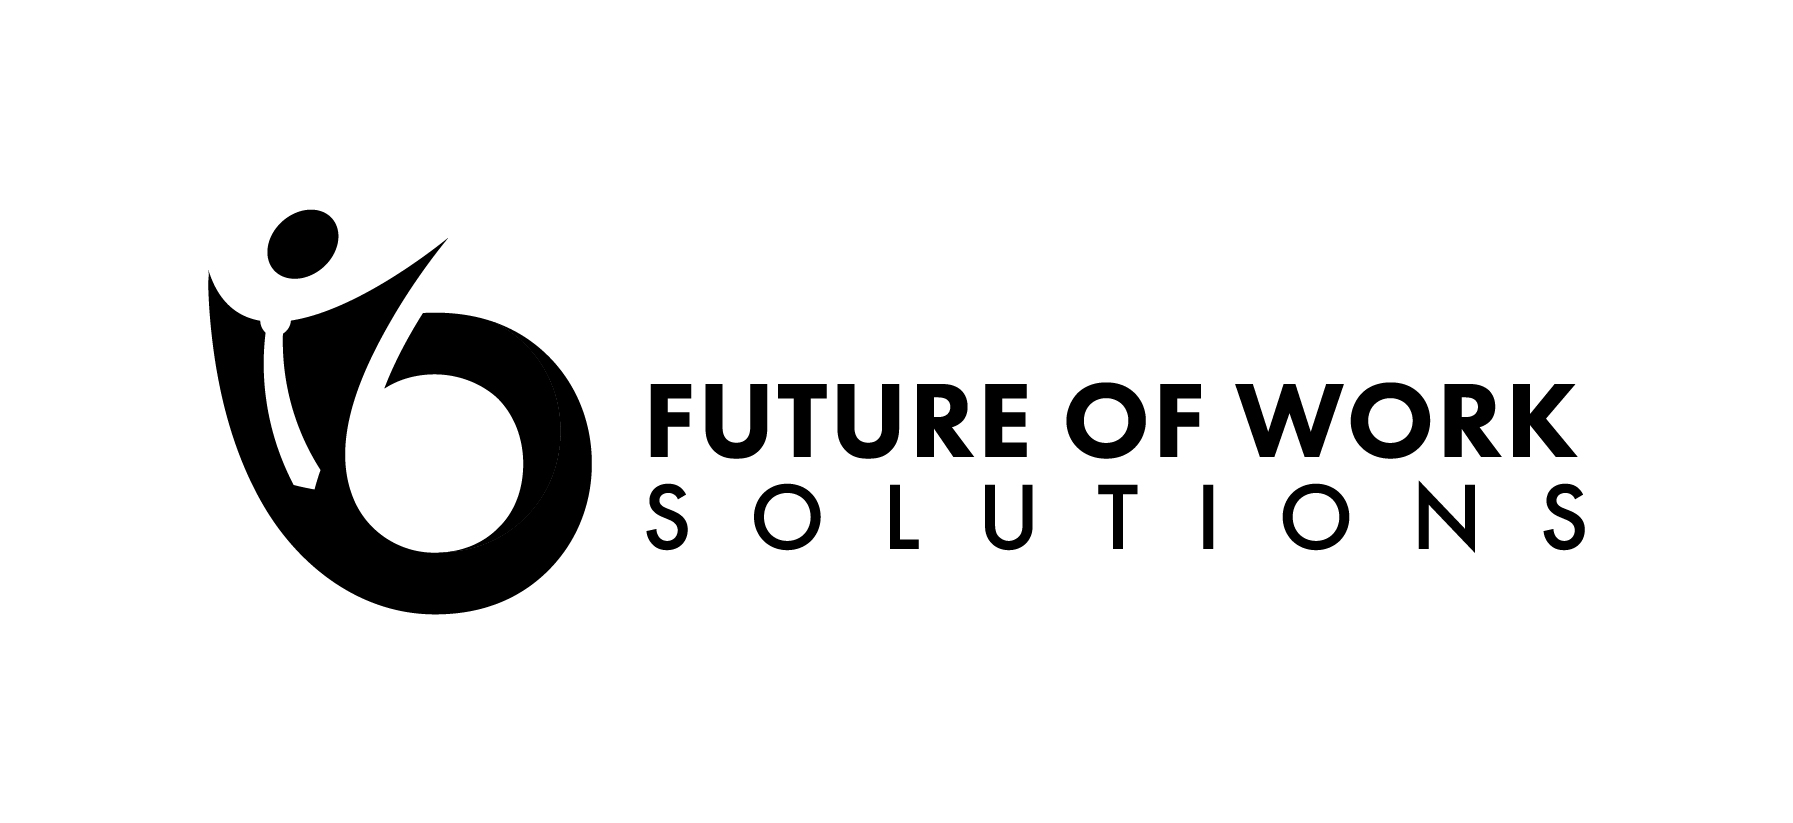 Future of Work Solutions - official partner of edisconet